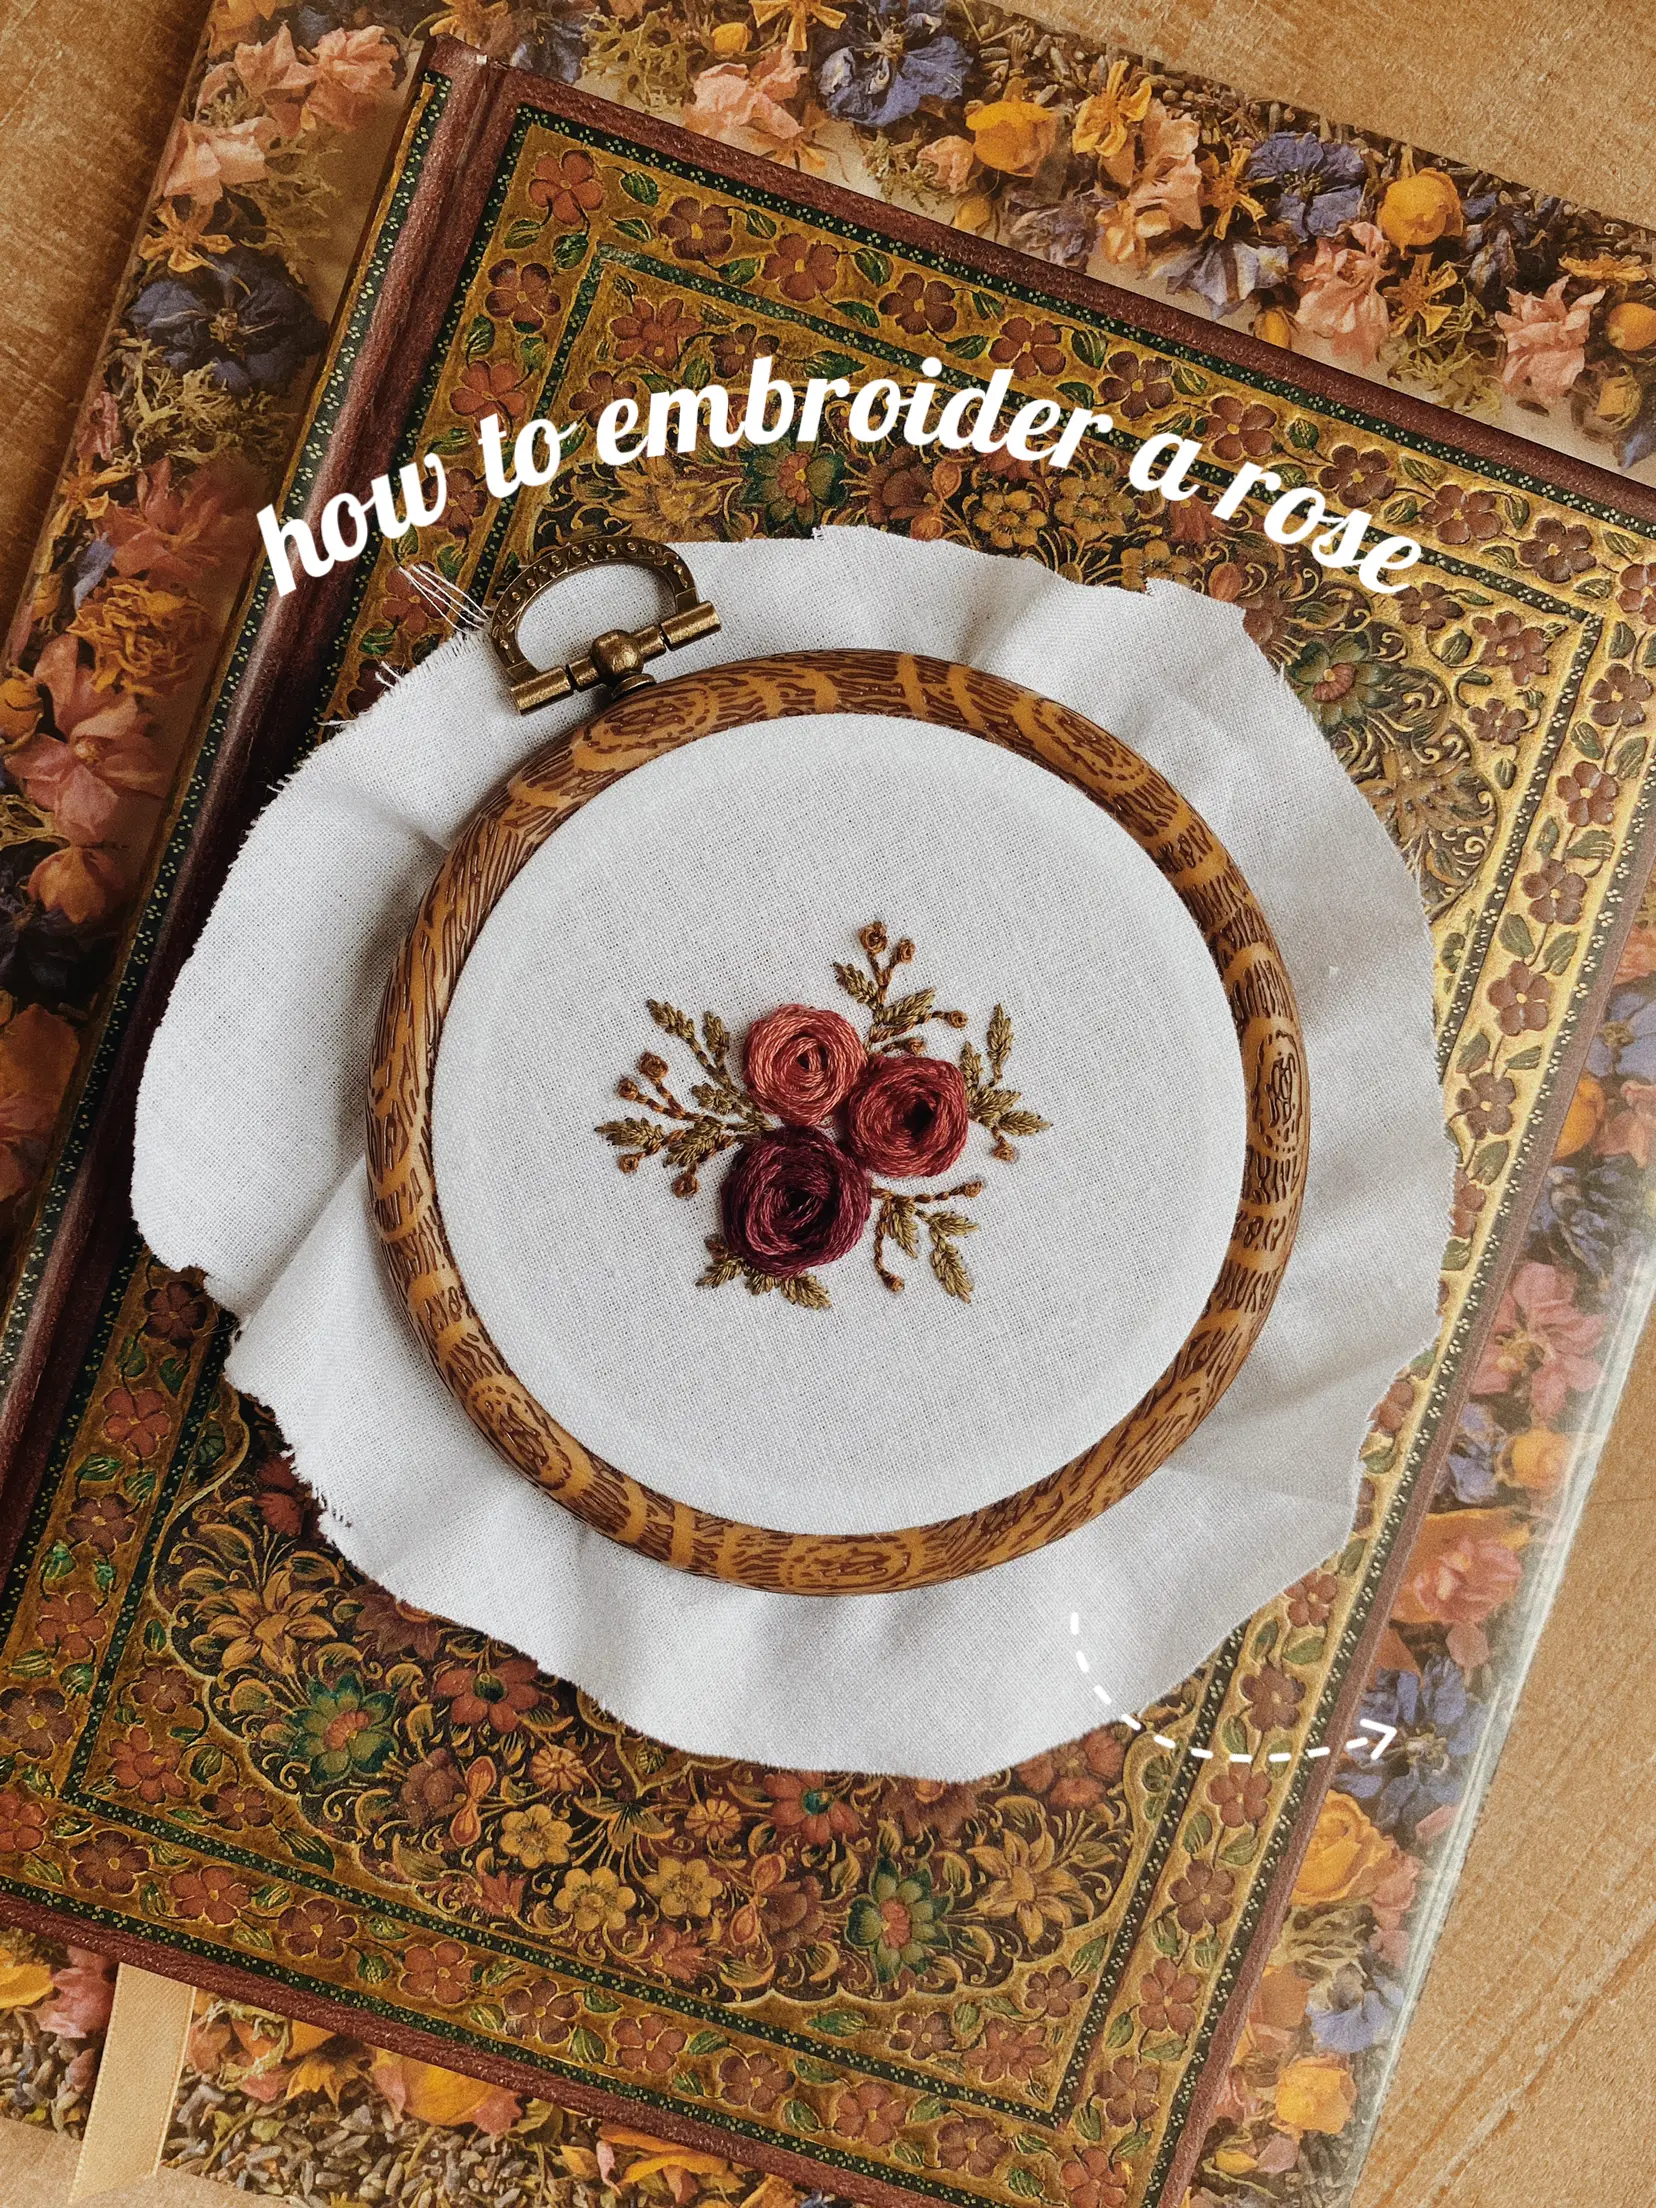 Embroidery inspirations for beginners - Lemon8 Search